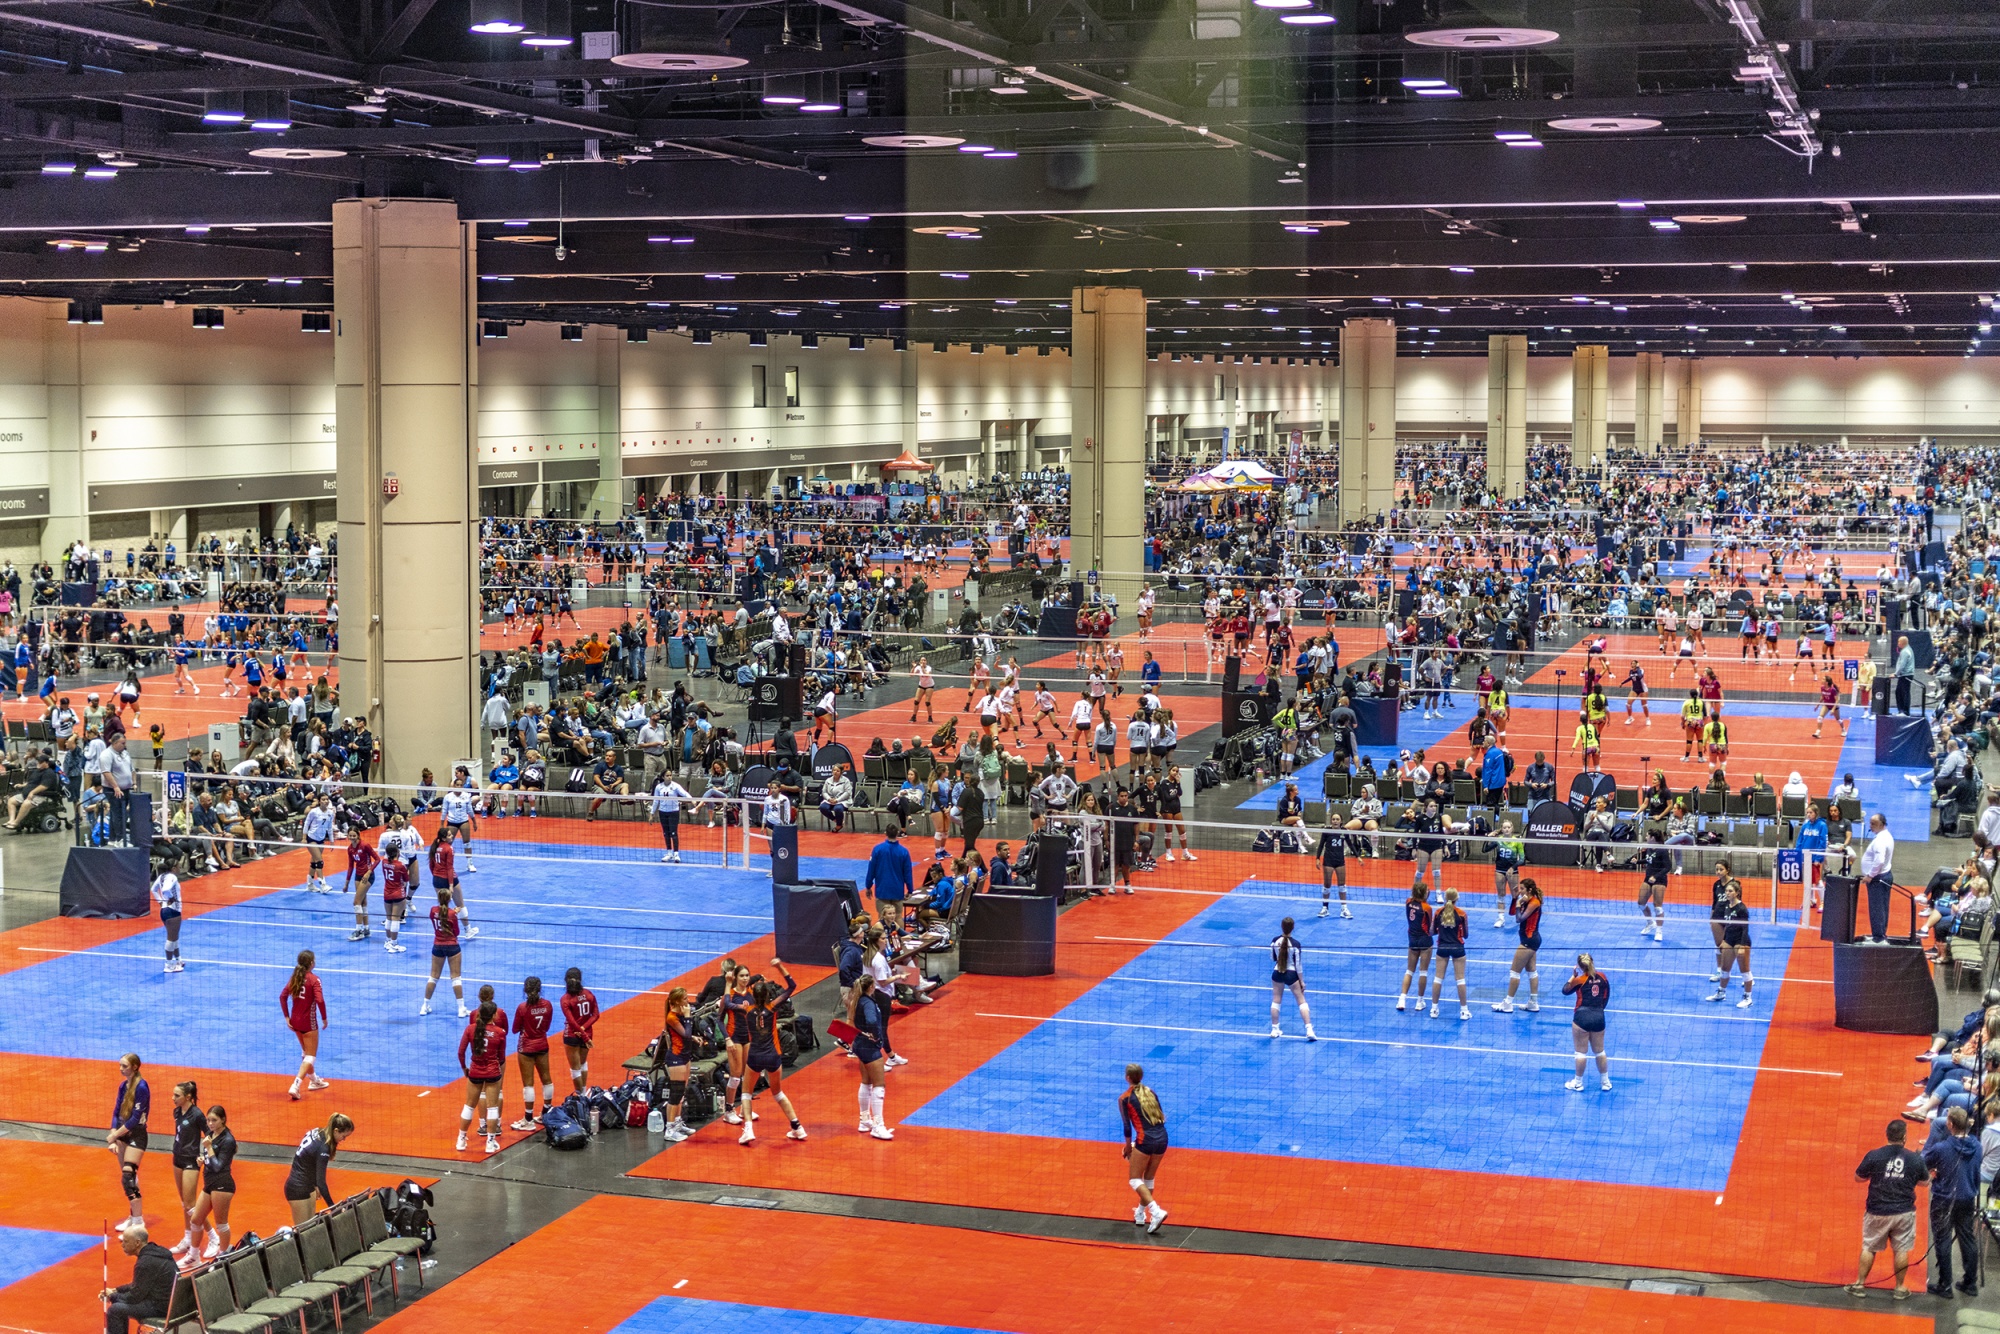 Kids’ Volleyball Games Are Key Driver of Convention Recovery Bloomberg